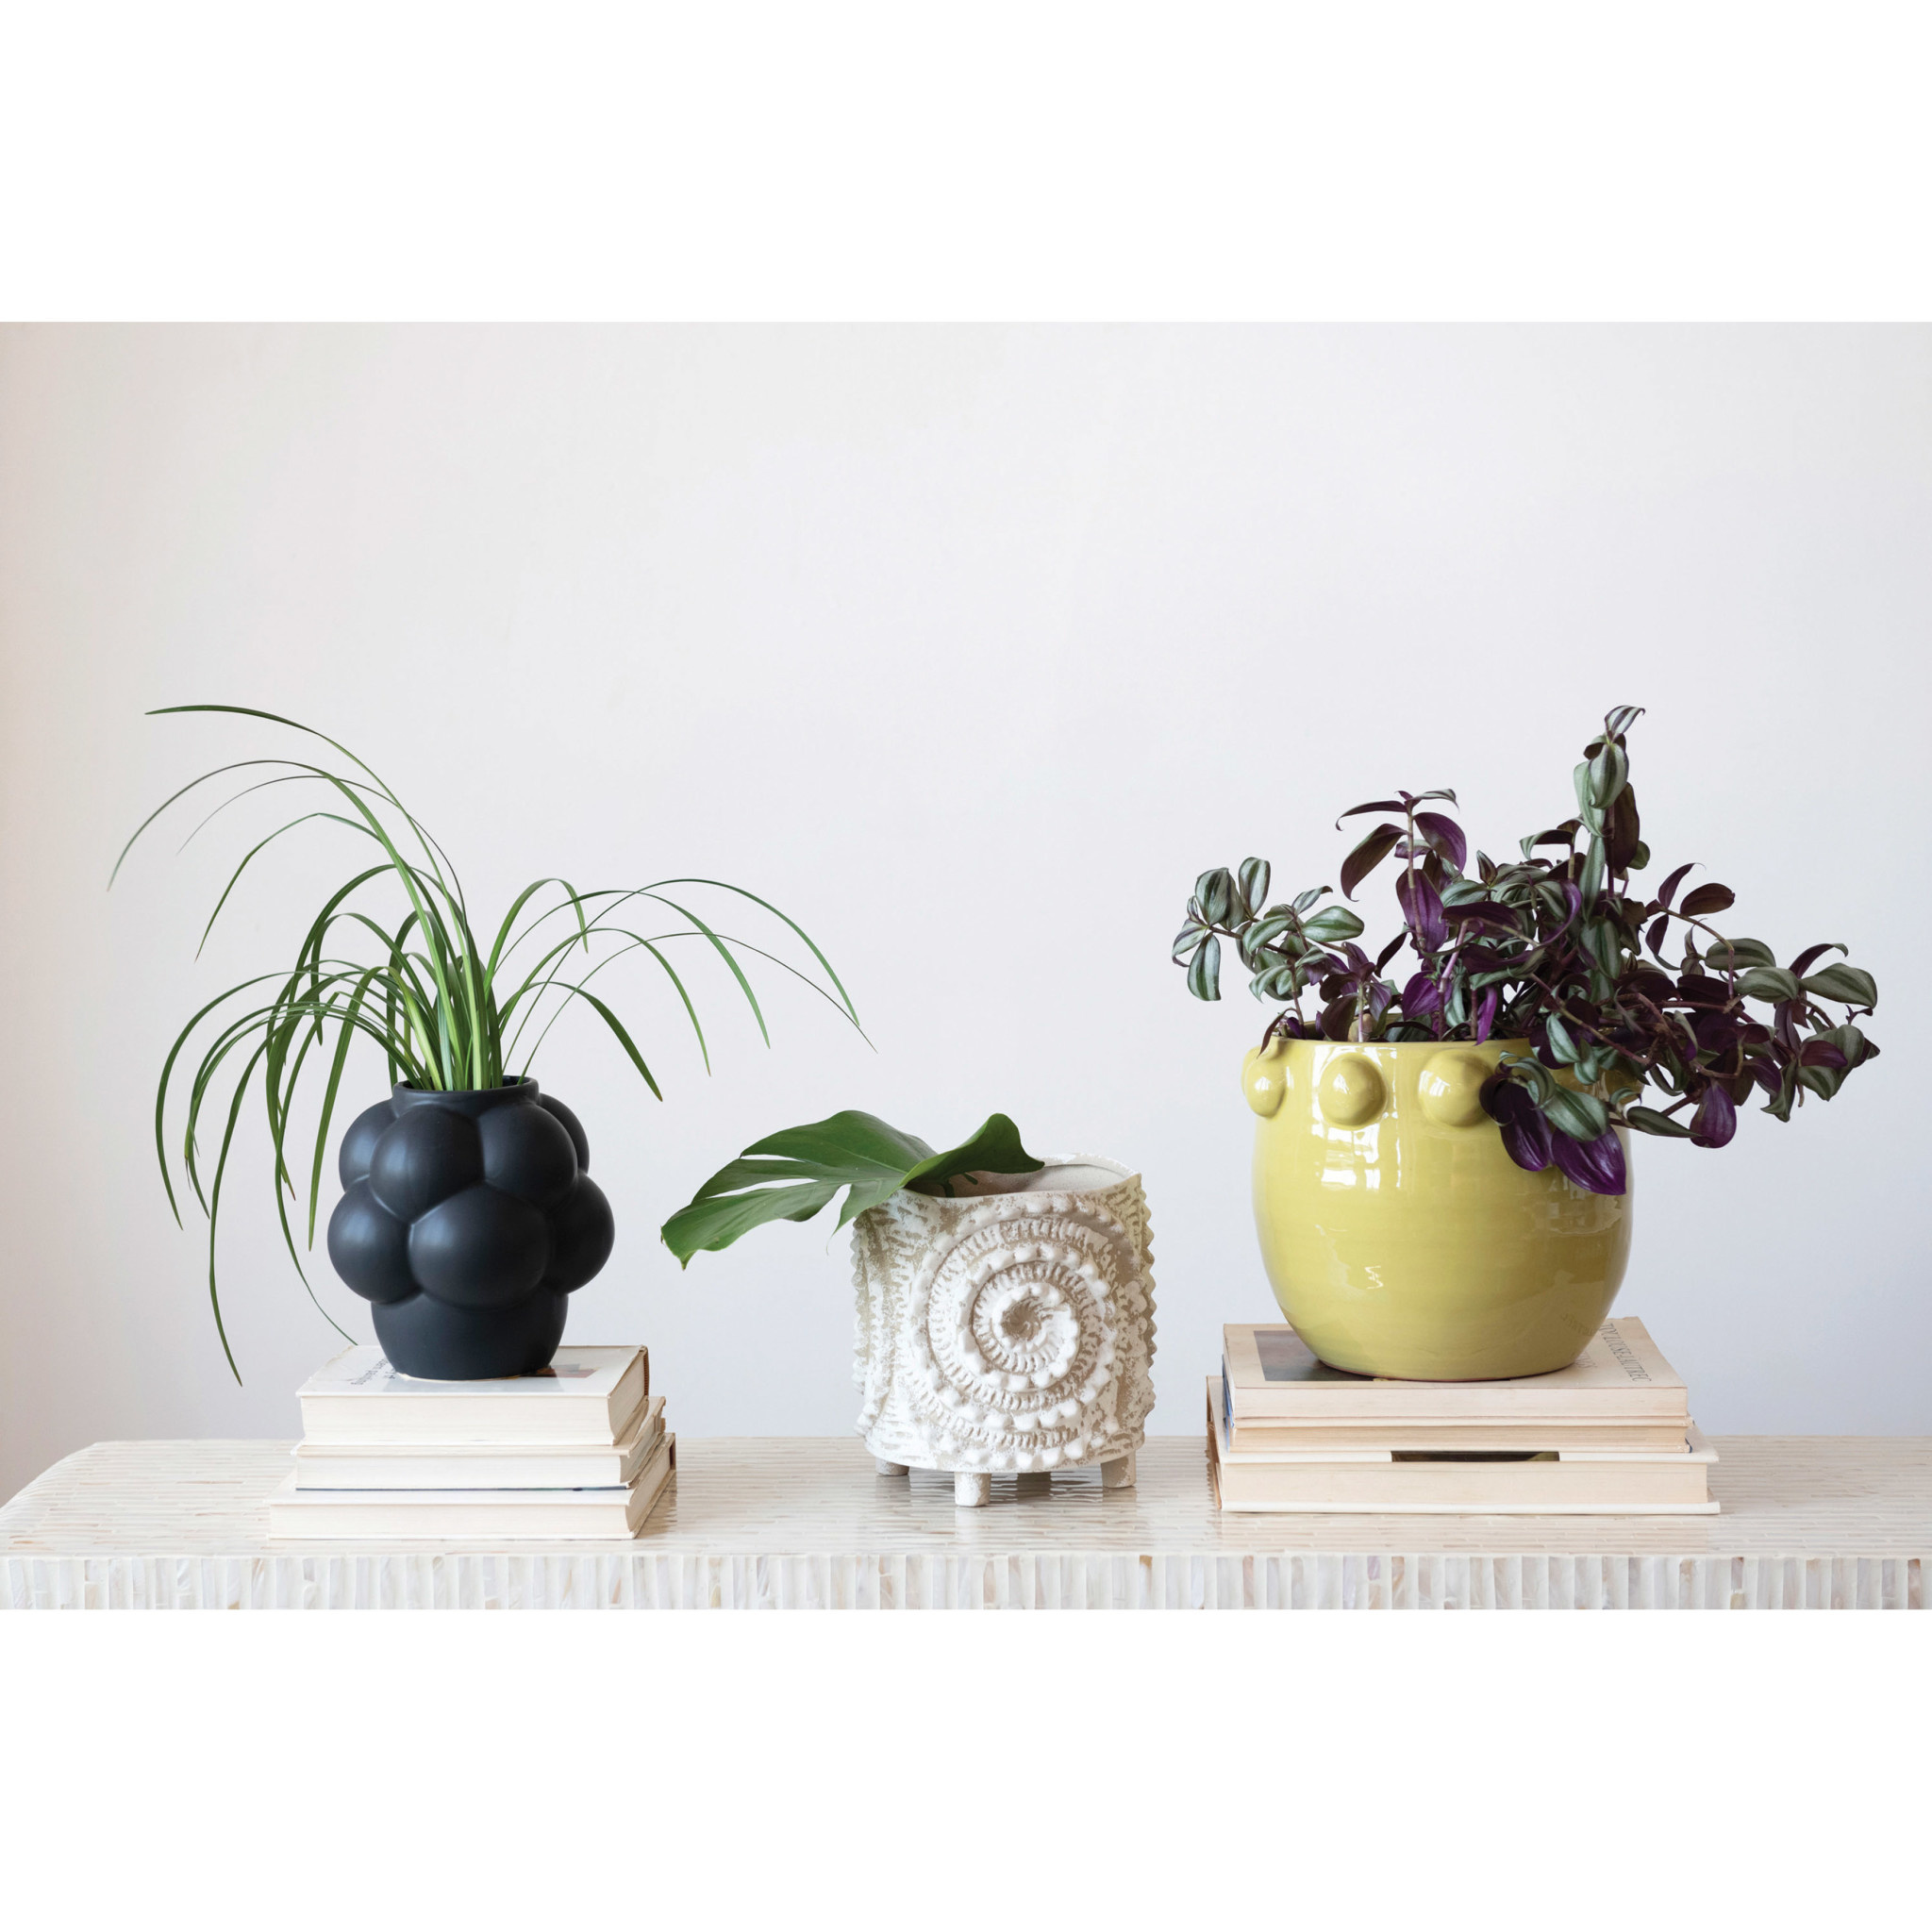 available at m. lynne designs Chartreuse Terracotta with Raised Dots Planter